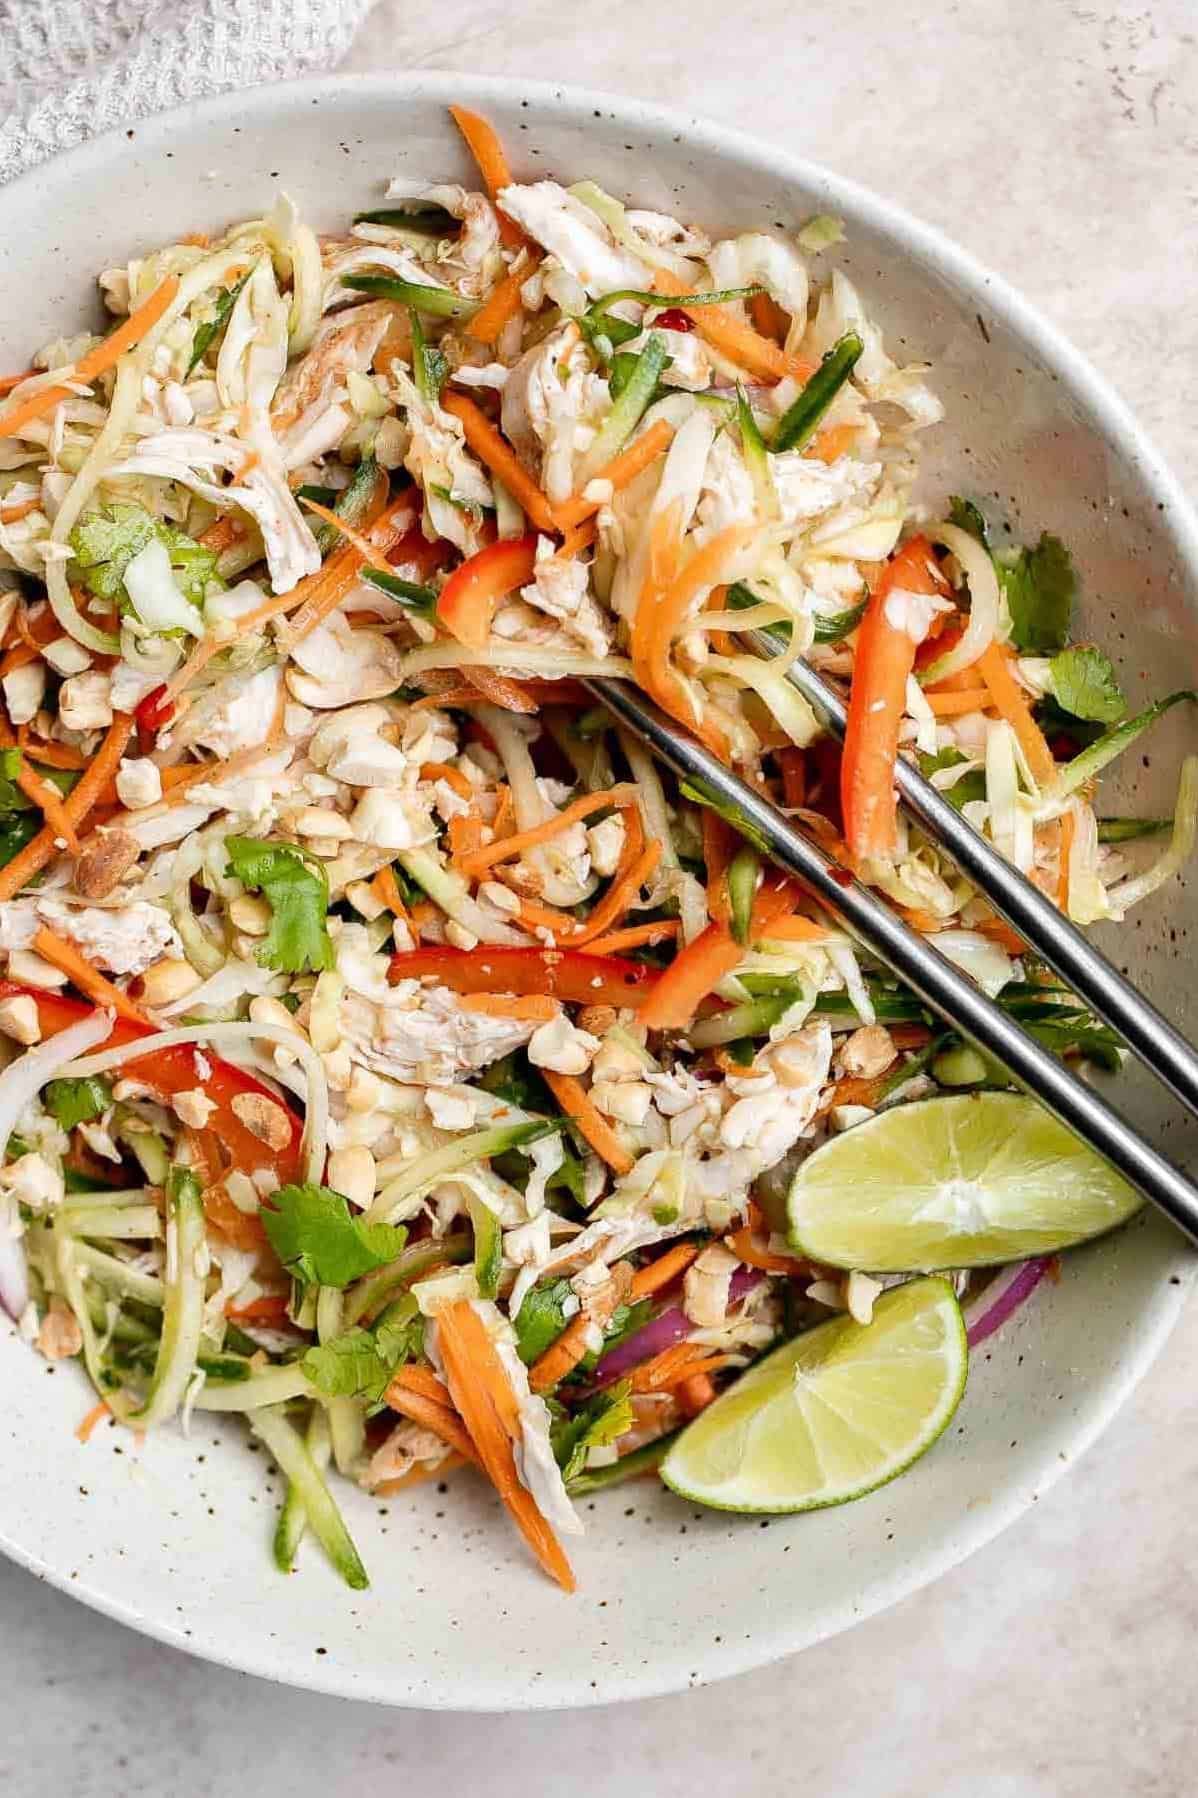 Sure thing! Here are 11 unique photo captions for the Vietnamese Chicken Salad recipe: